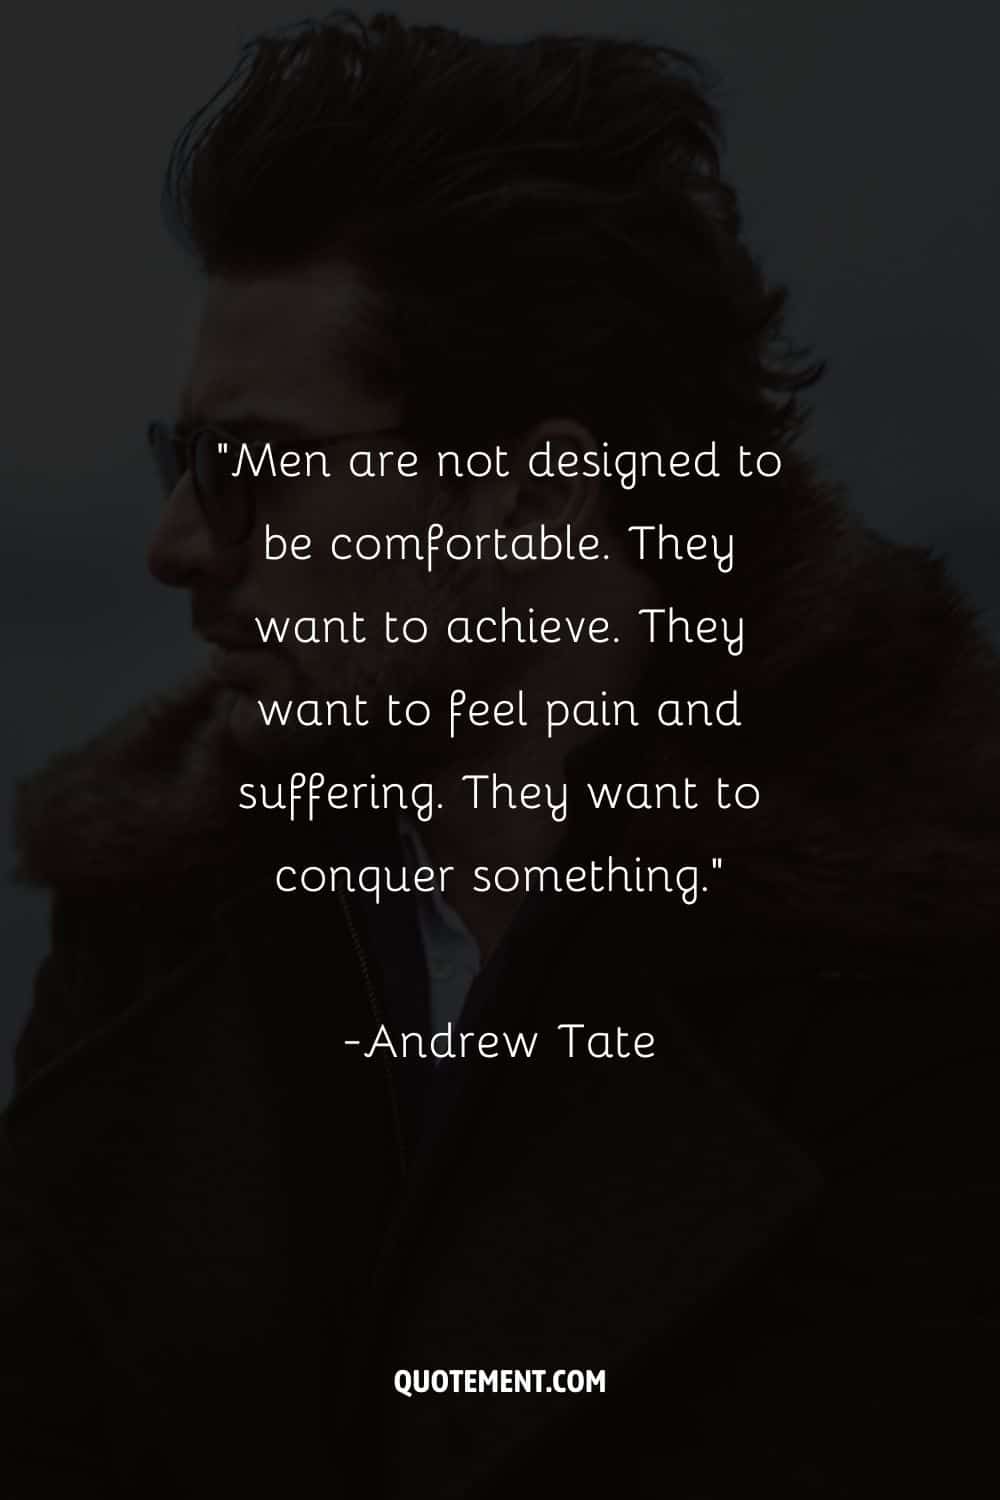 “Men are not designed to be comfortable. They want to achieve. They want to feel pain and suffering. They want to conquer something.”